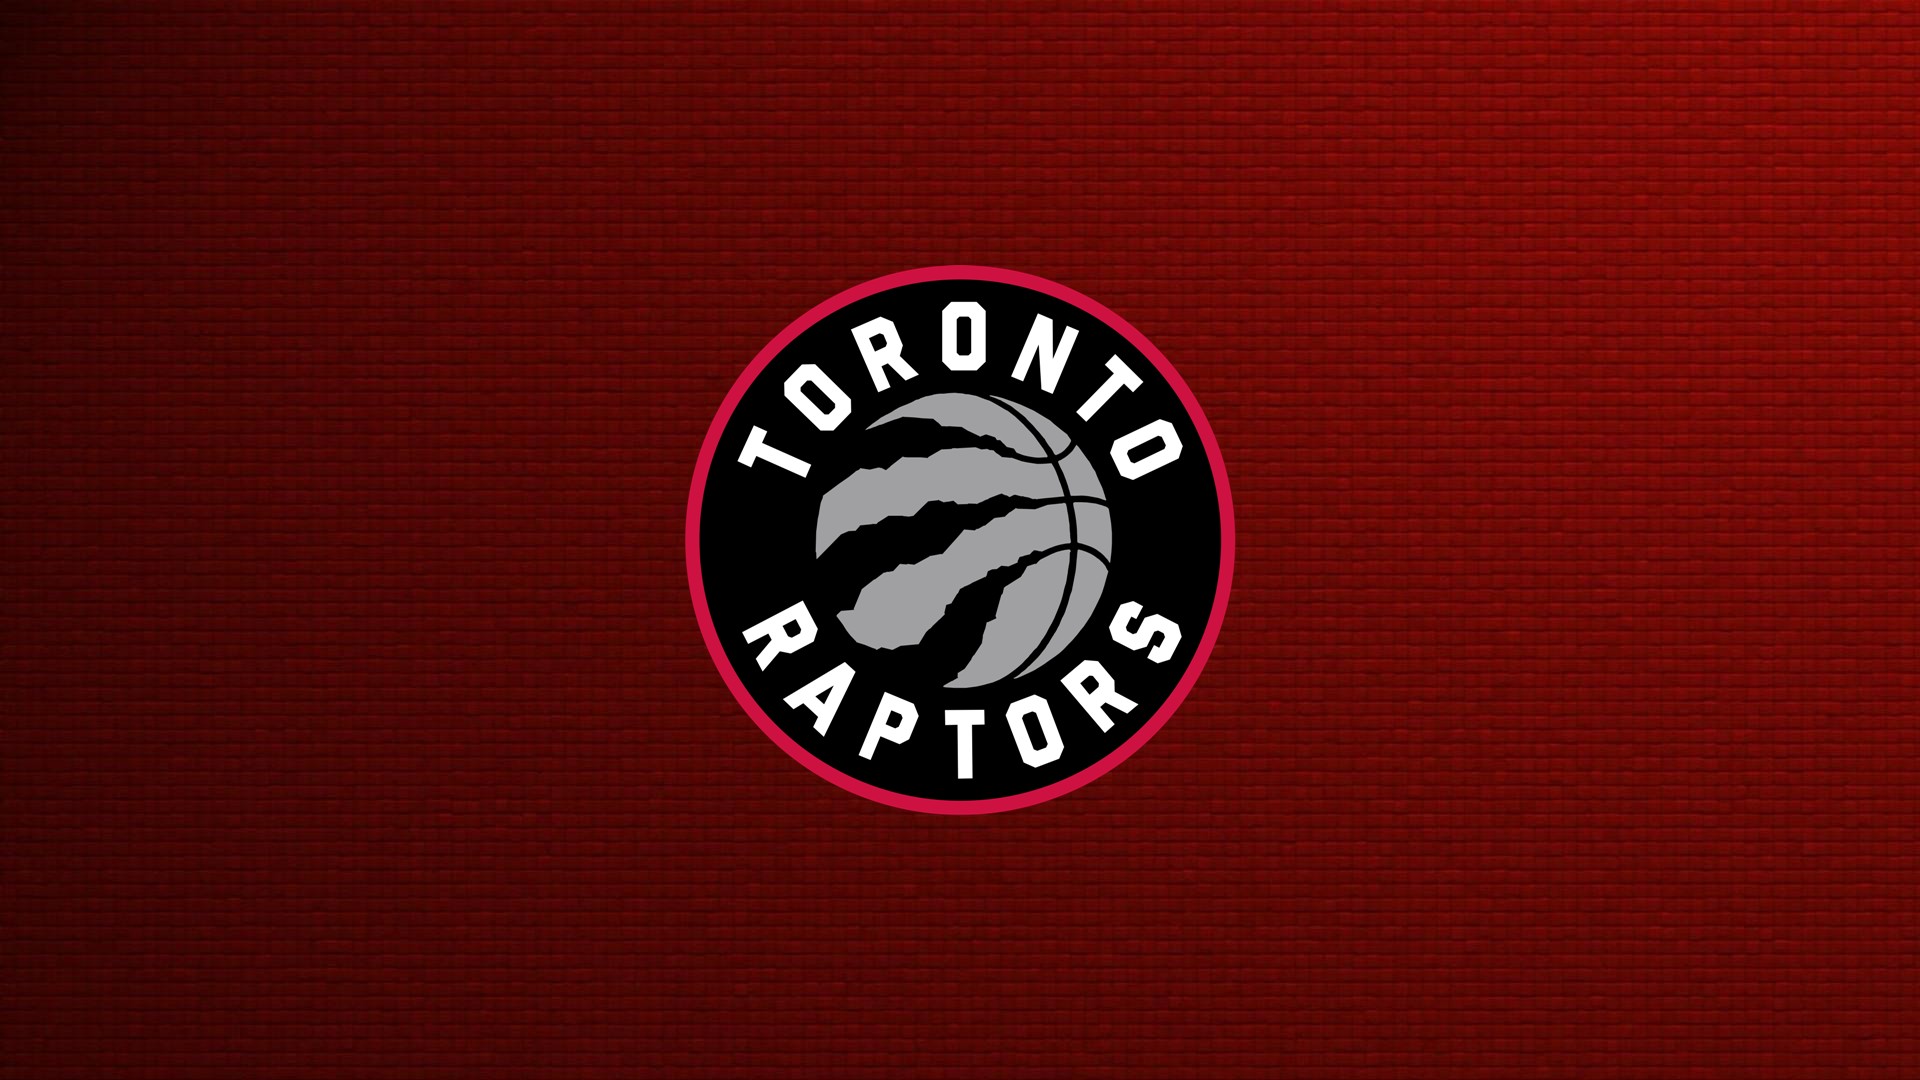 Basketball Toronto Backgrounds HD with image dimensions 1920x1080 pixel. You can make this wallpaper for your Desktop Computer Backgrounds, Windows or Mac Screensavers, iPhone Lock screen, Tablet or Android and another Mobile Phone device